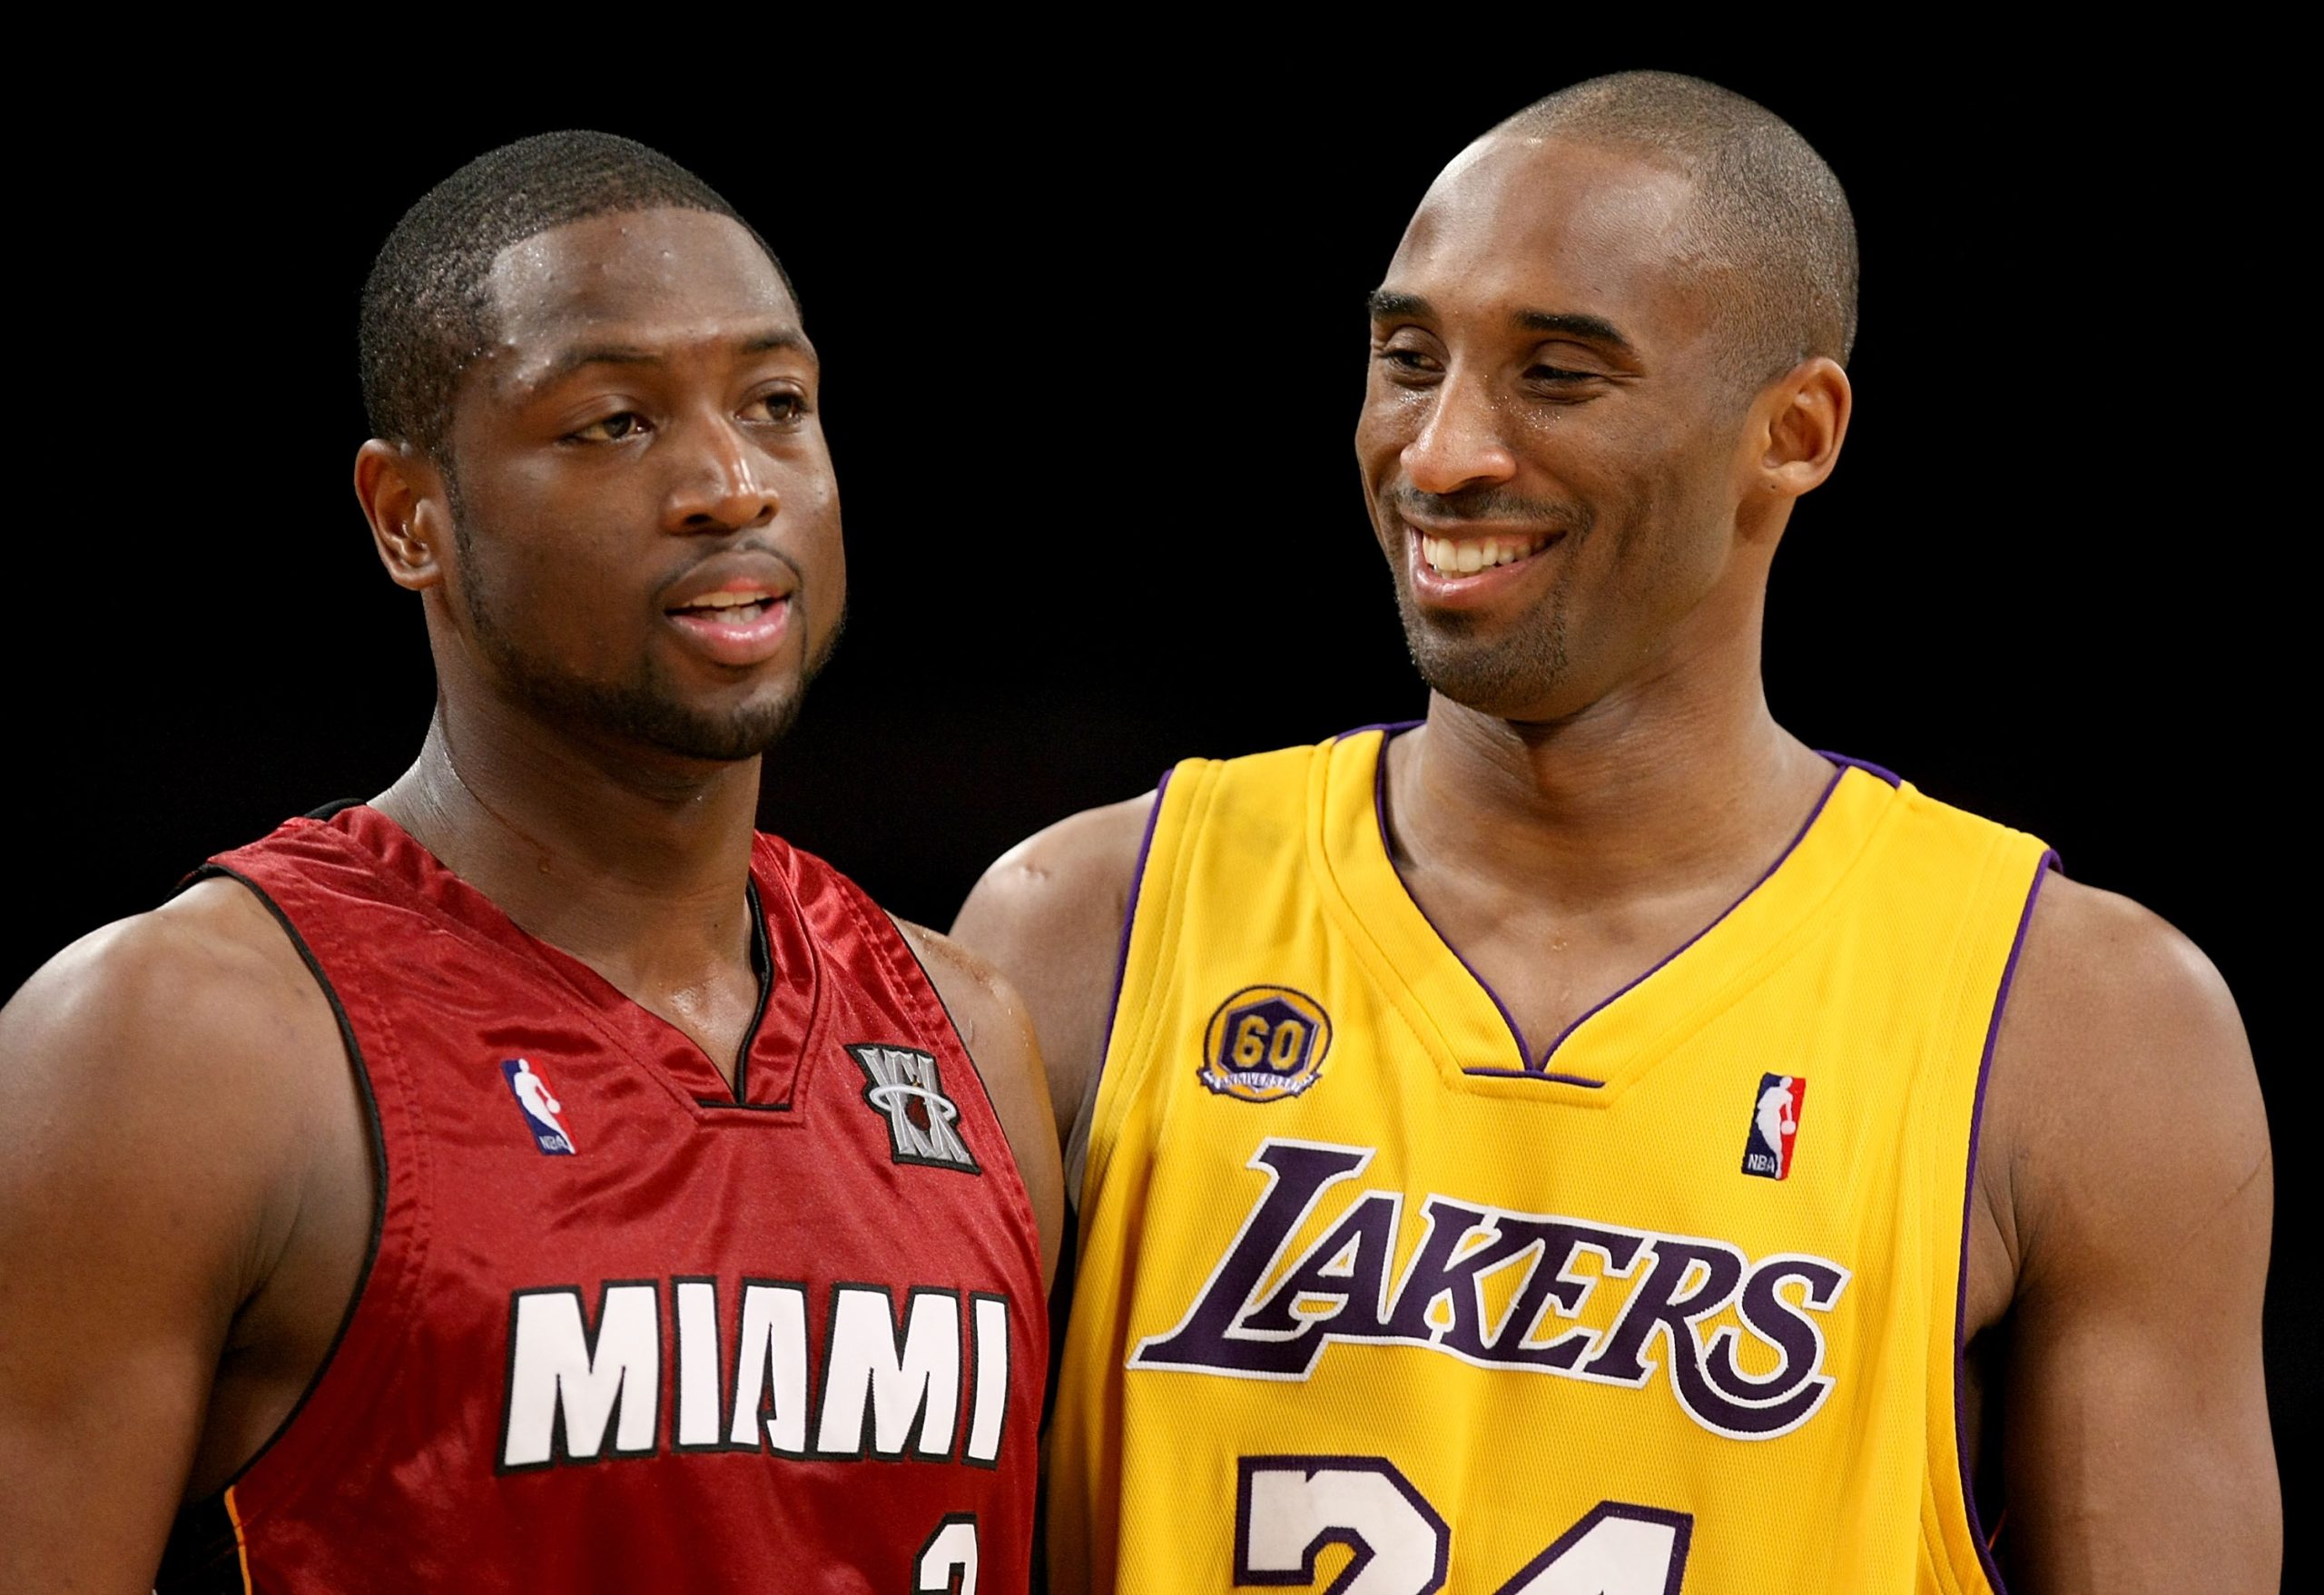 Dwyane Wade of the Miami Heat, left, and Kobe Bryant of the Los Angeles Lakers talk during a break.